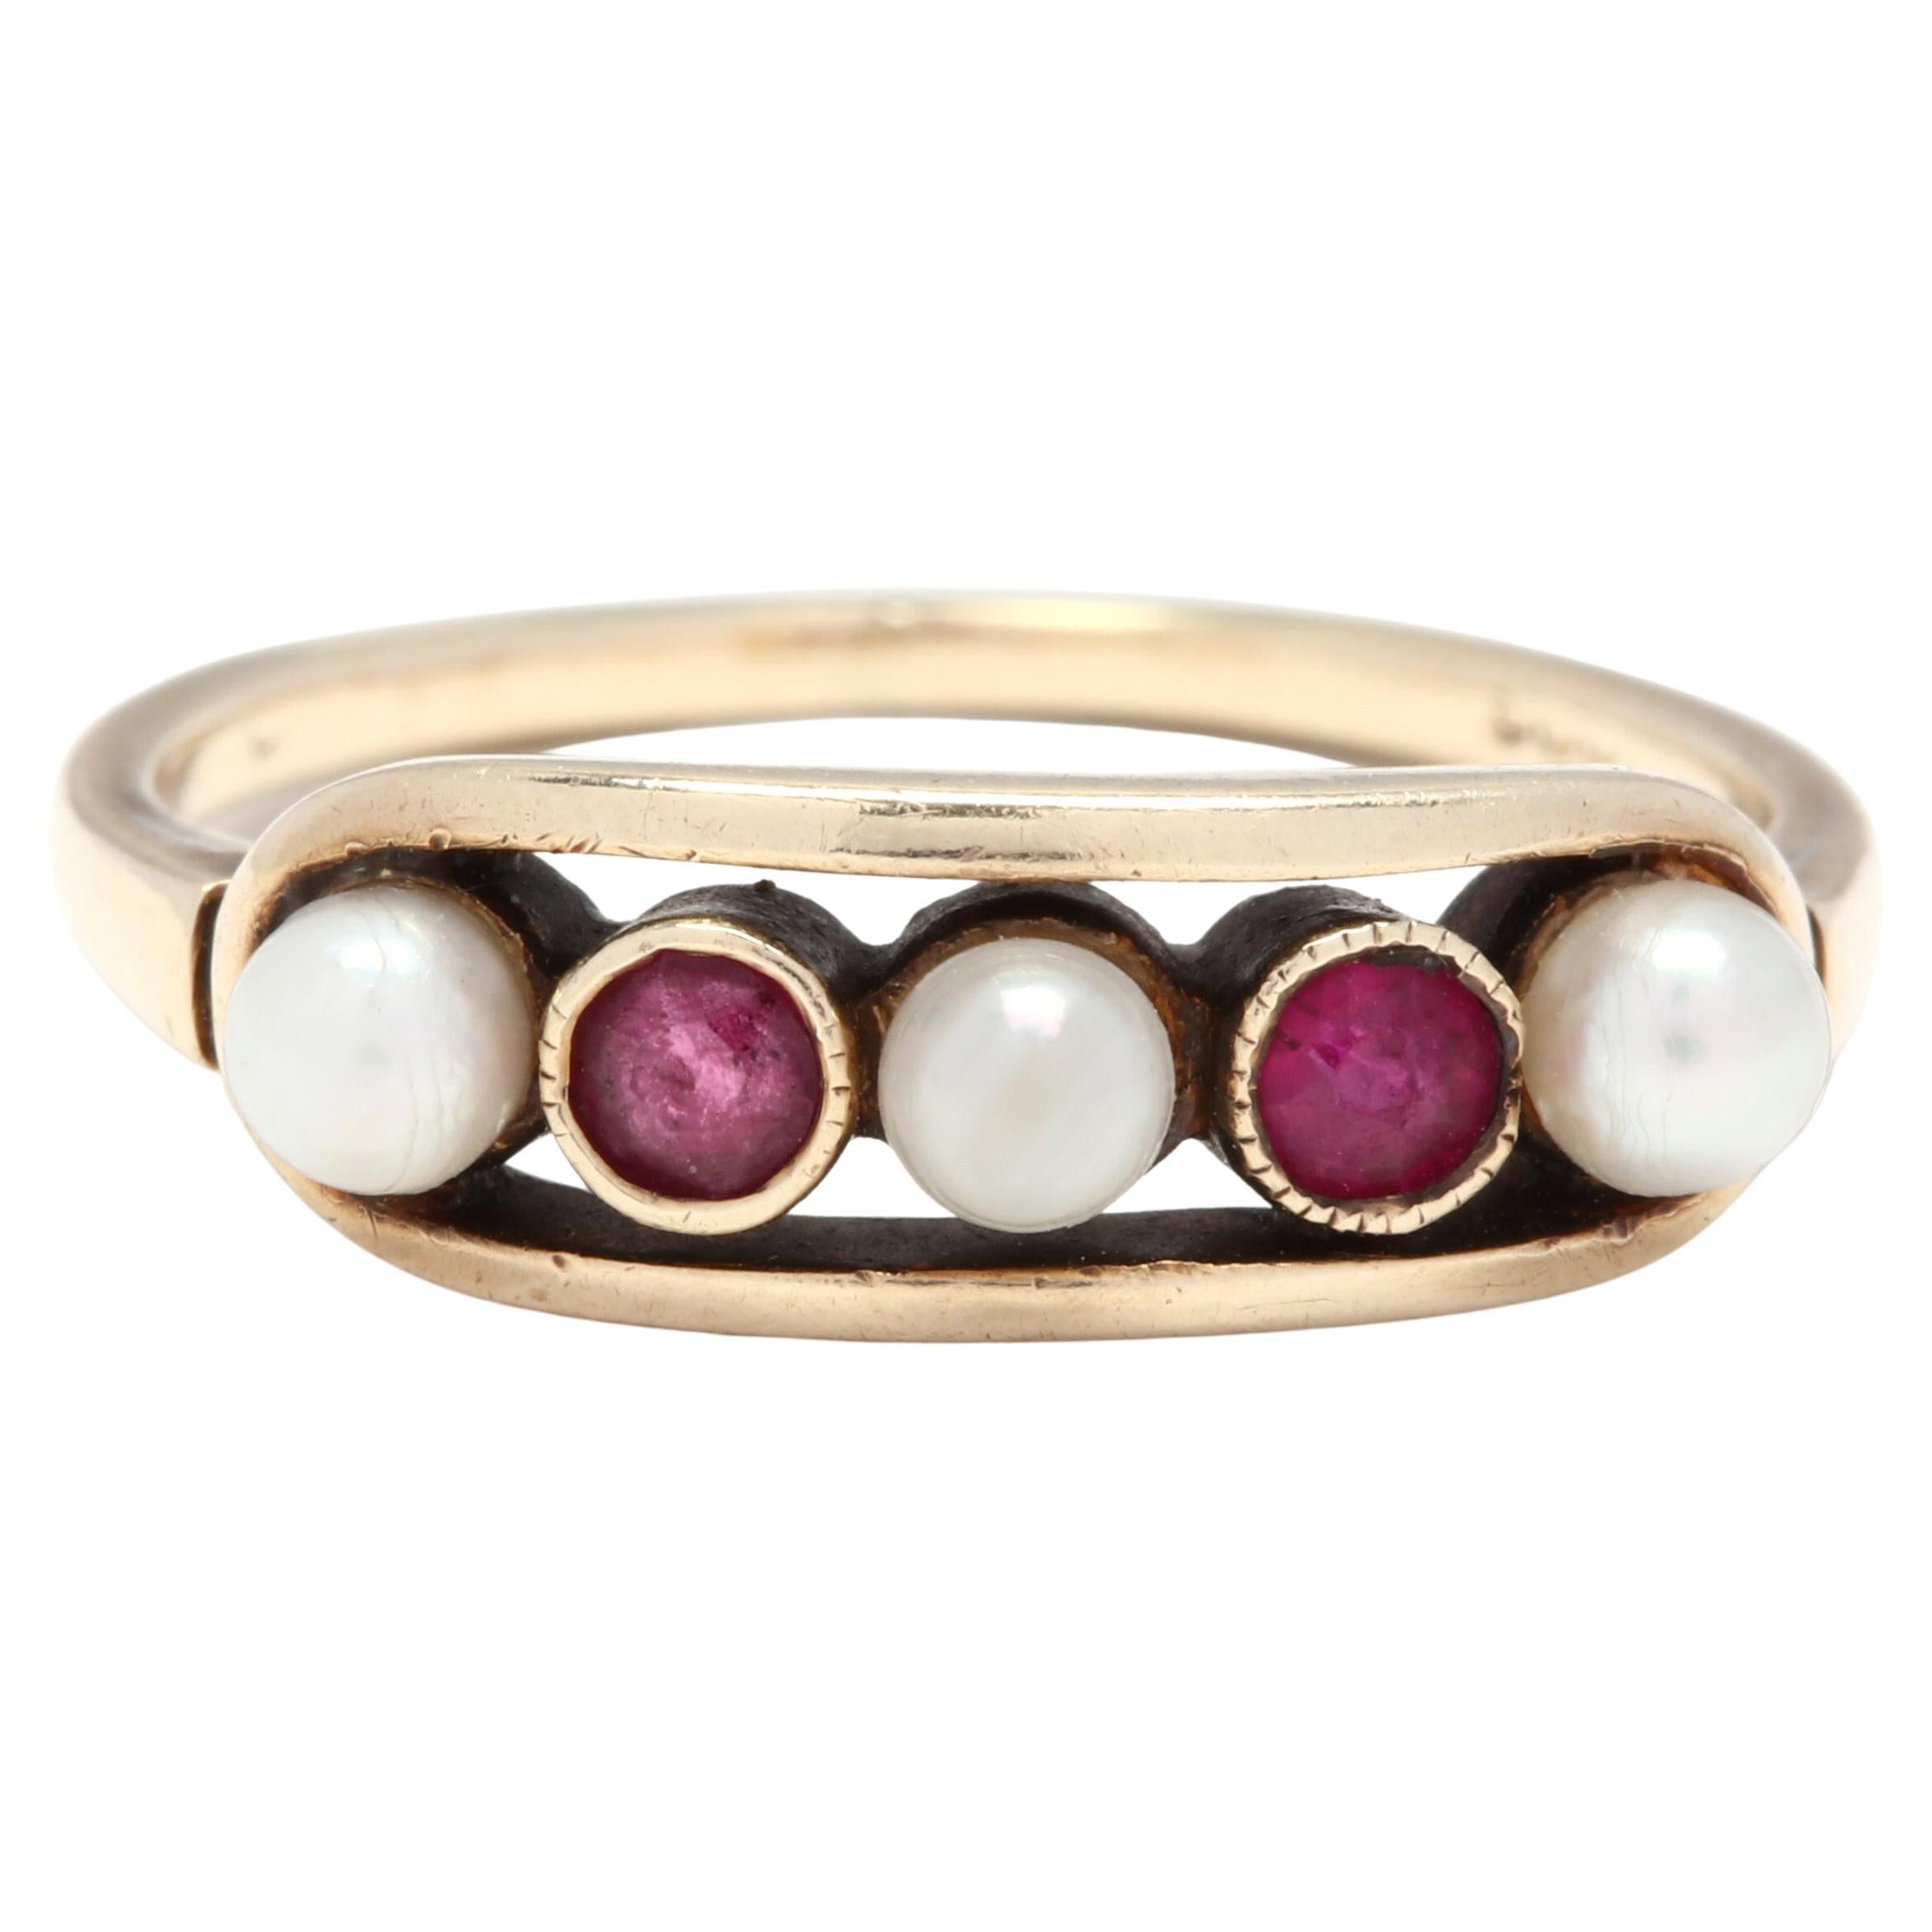 Antique Pearl Ring, Red Stone Band, July Birthstone, 1930s Gold Ring, Stackable 